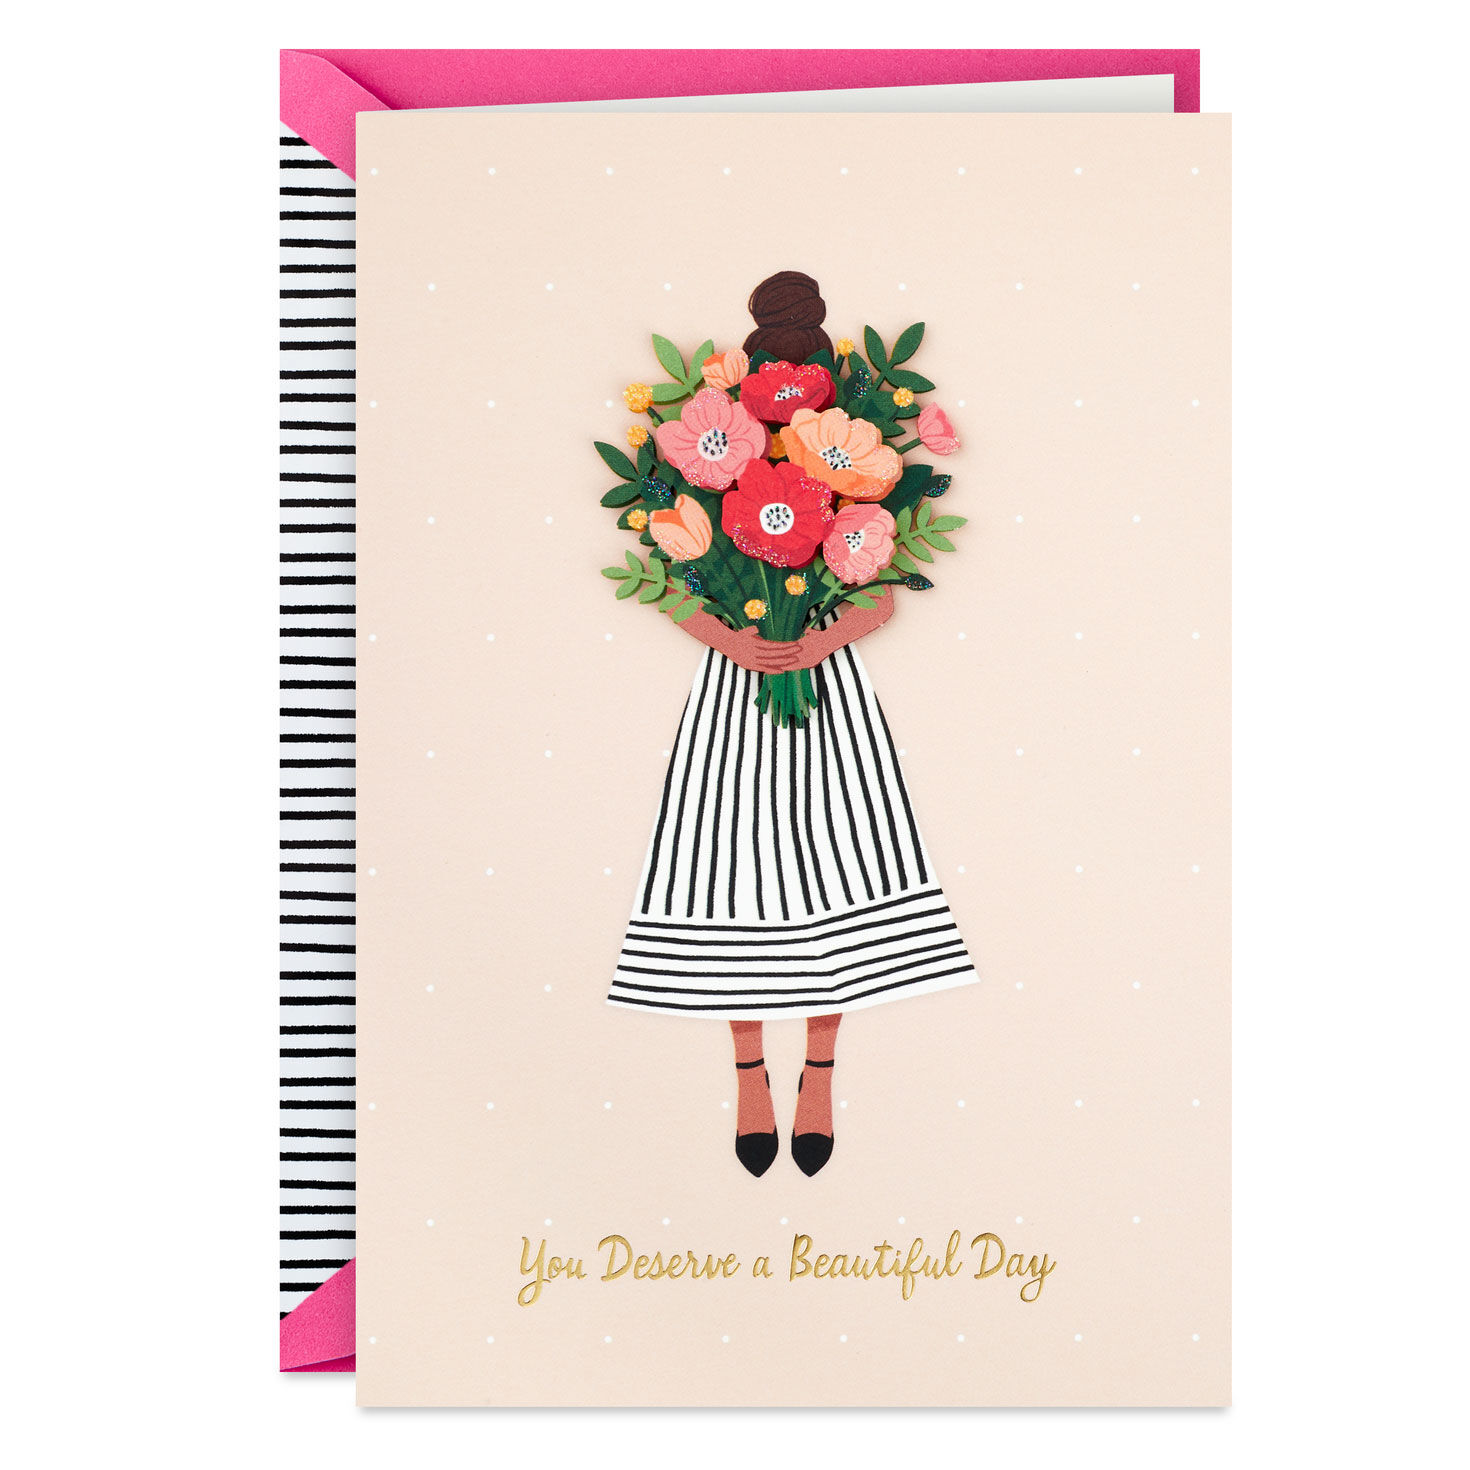 You Deserve a Beautiful Day Mother's Day Card for only USD 6.99 | Hallmark